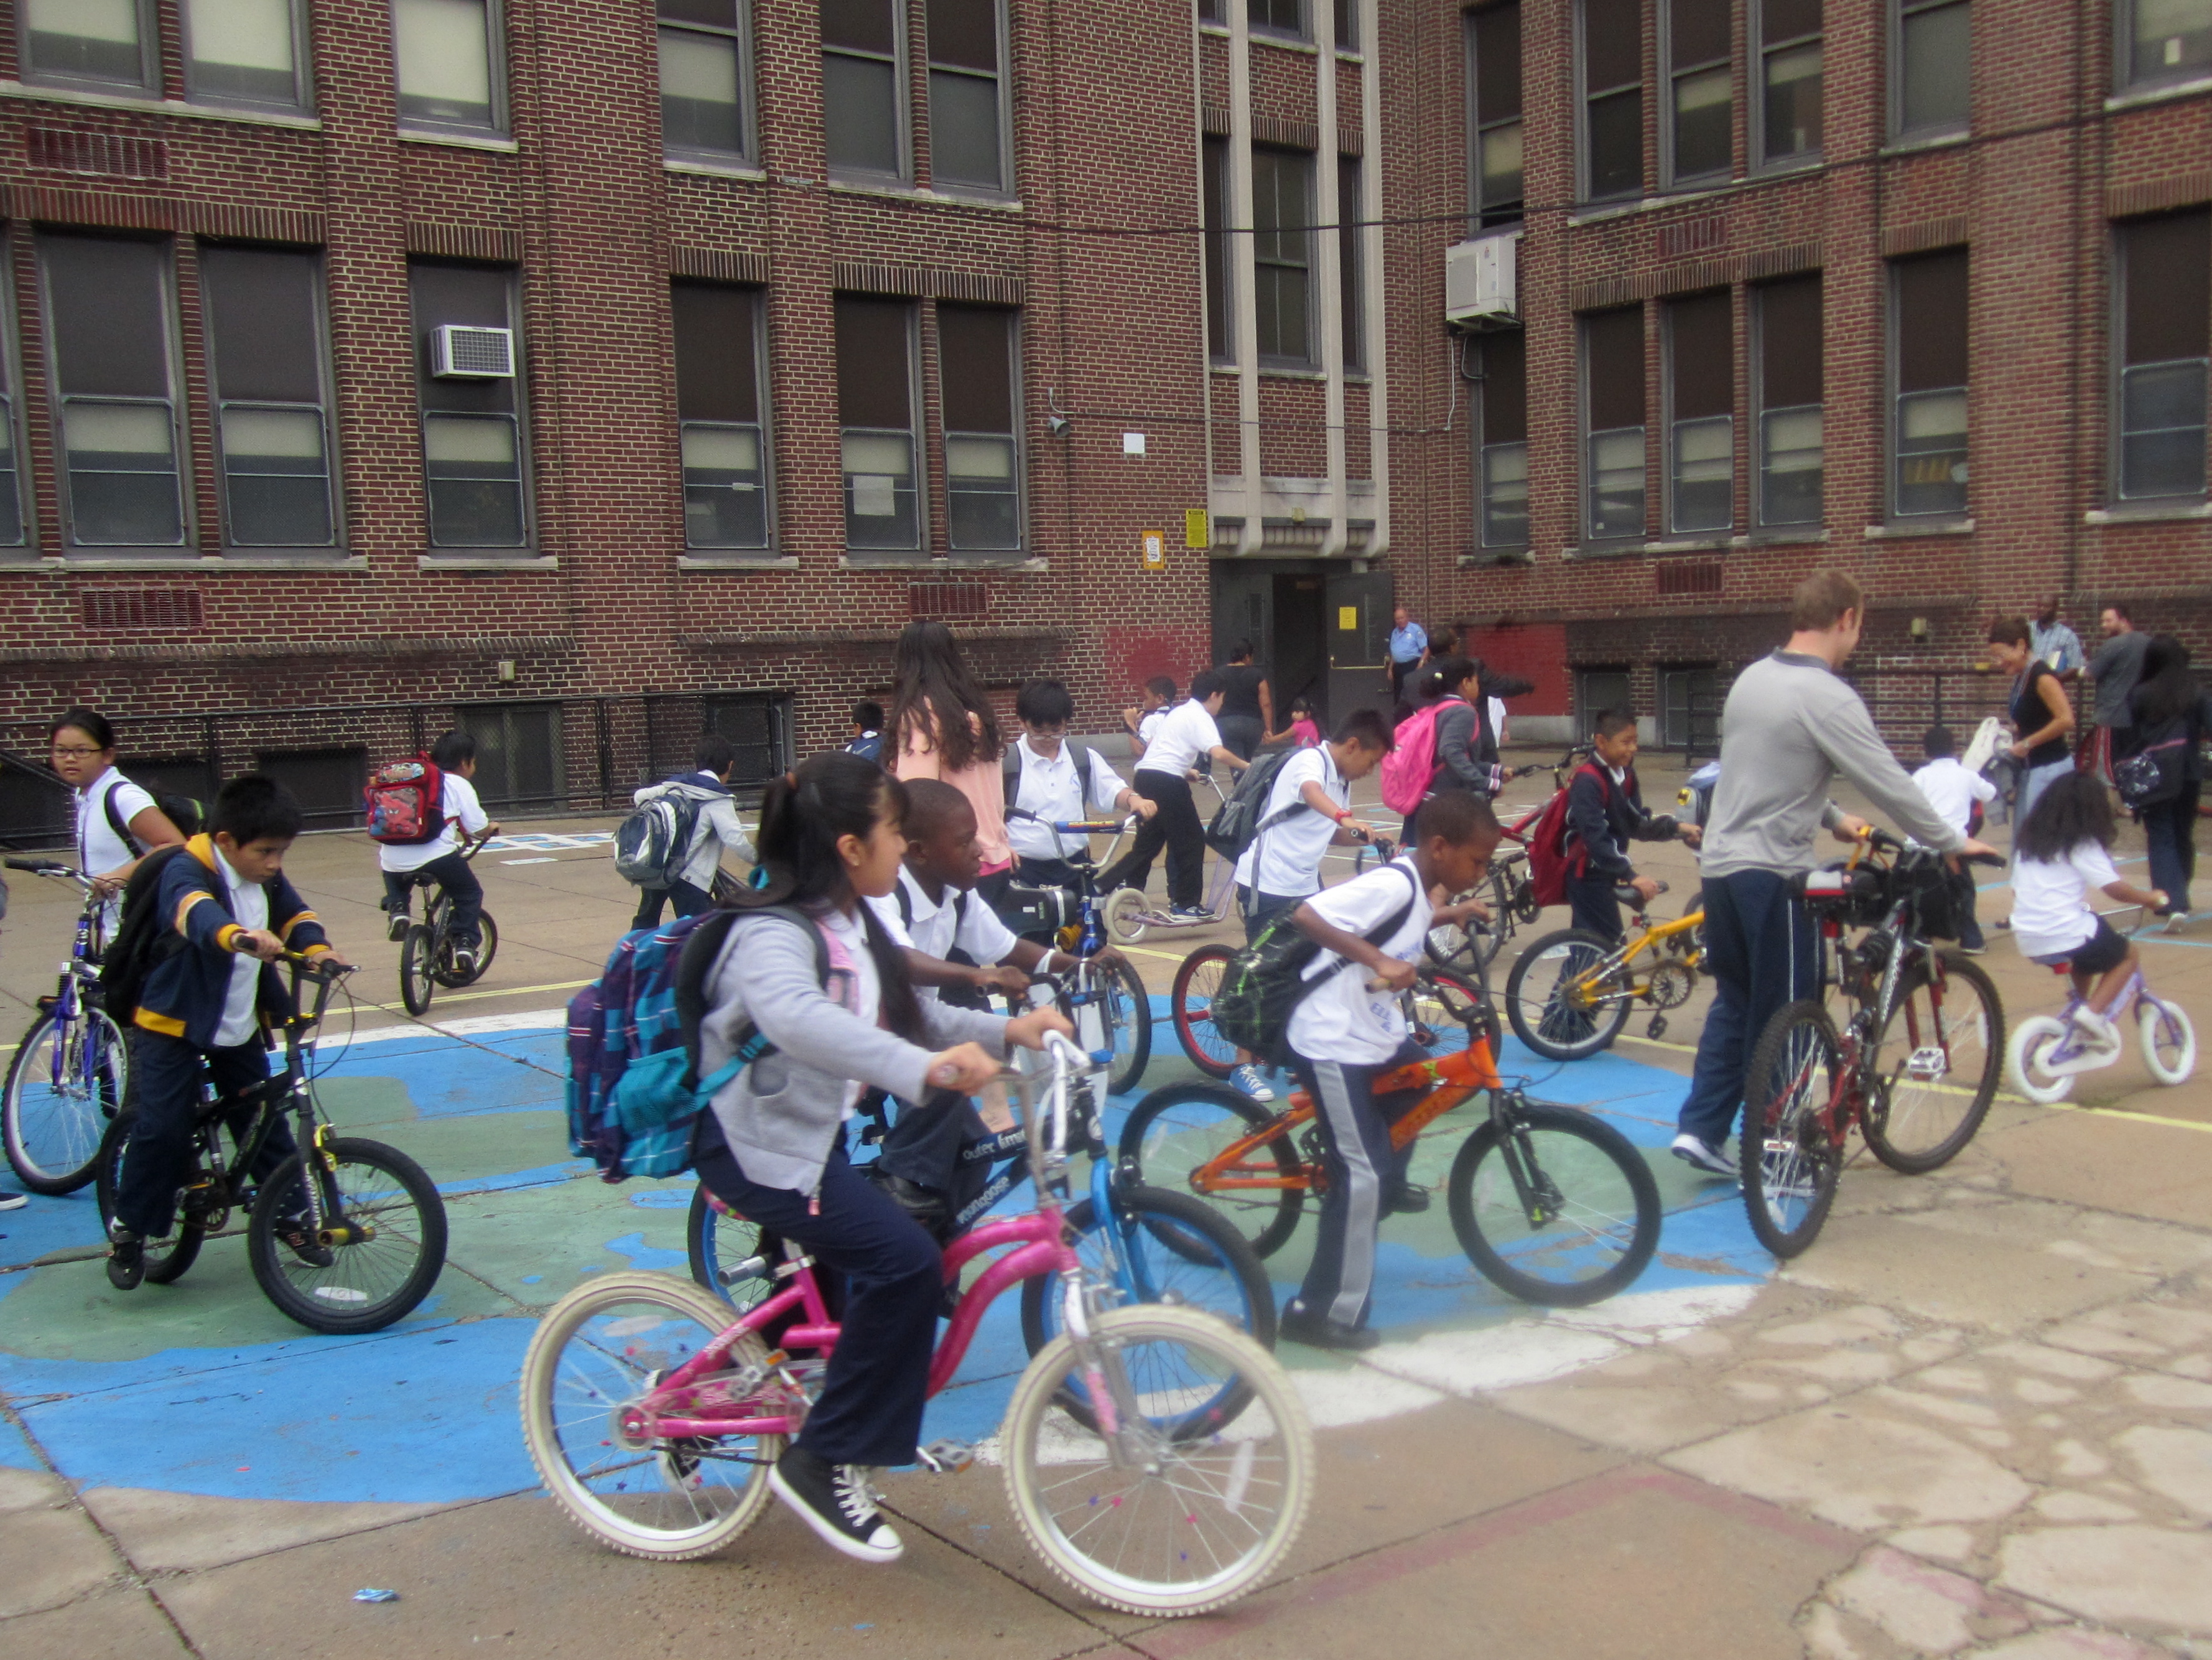 Students gathered in the George Washington Elementary School courtyard after walking and biking to school Thursday